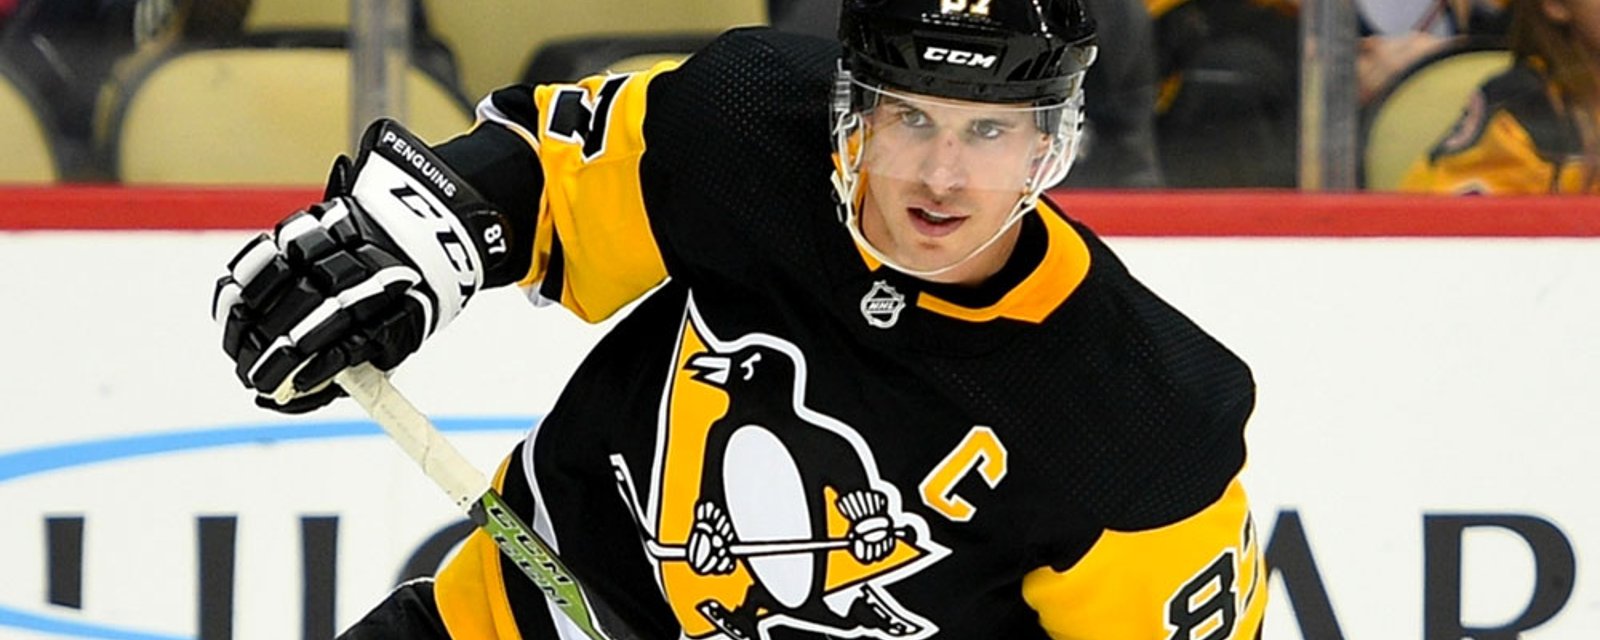 Penguins announce that Crosby will miss start of 2021-22 season